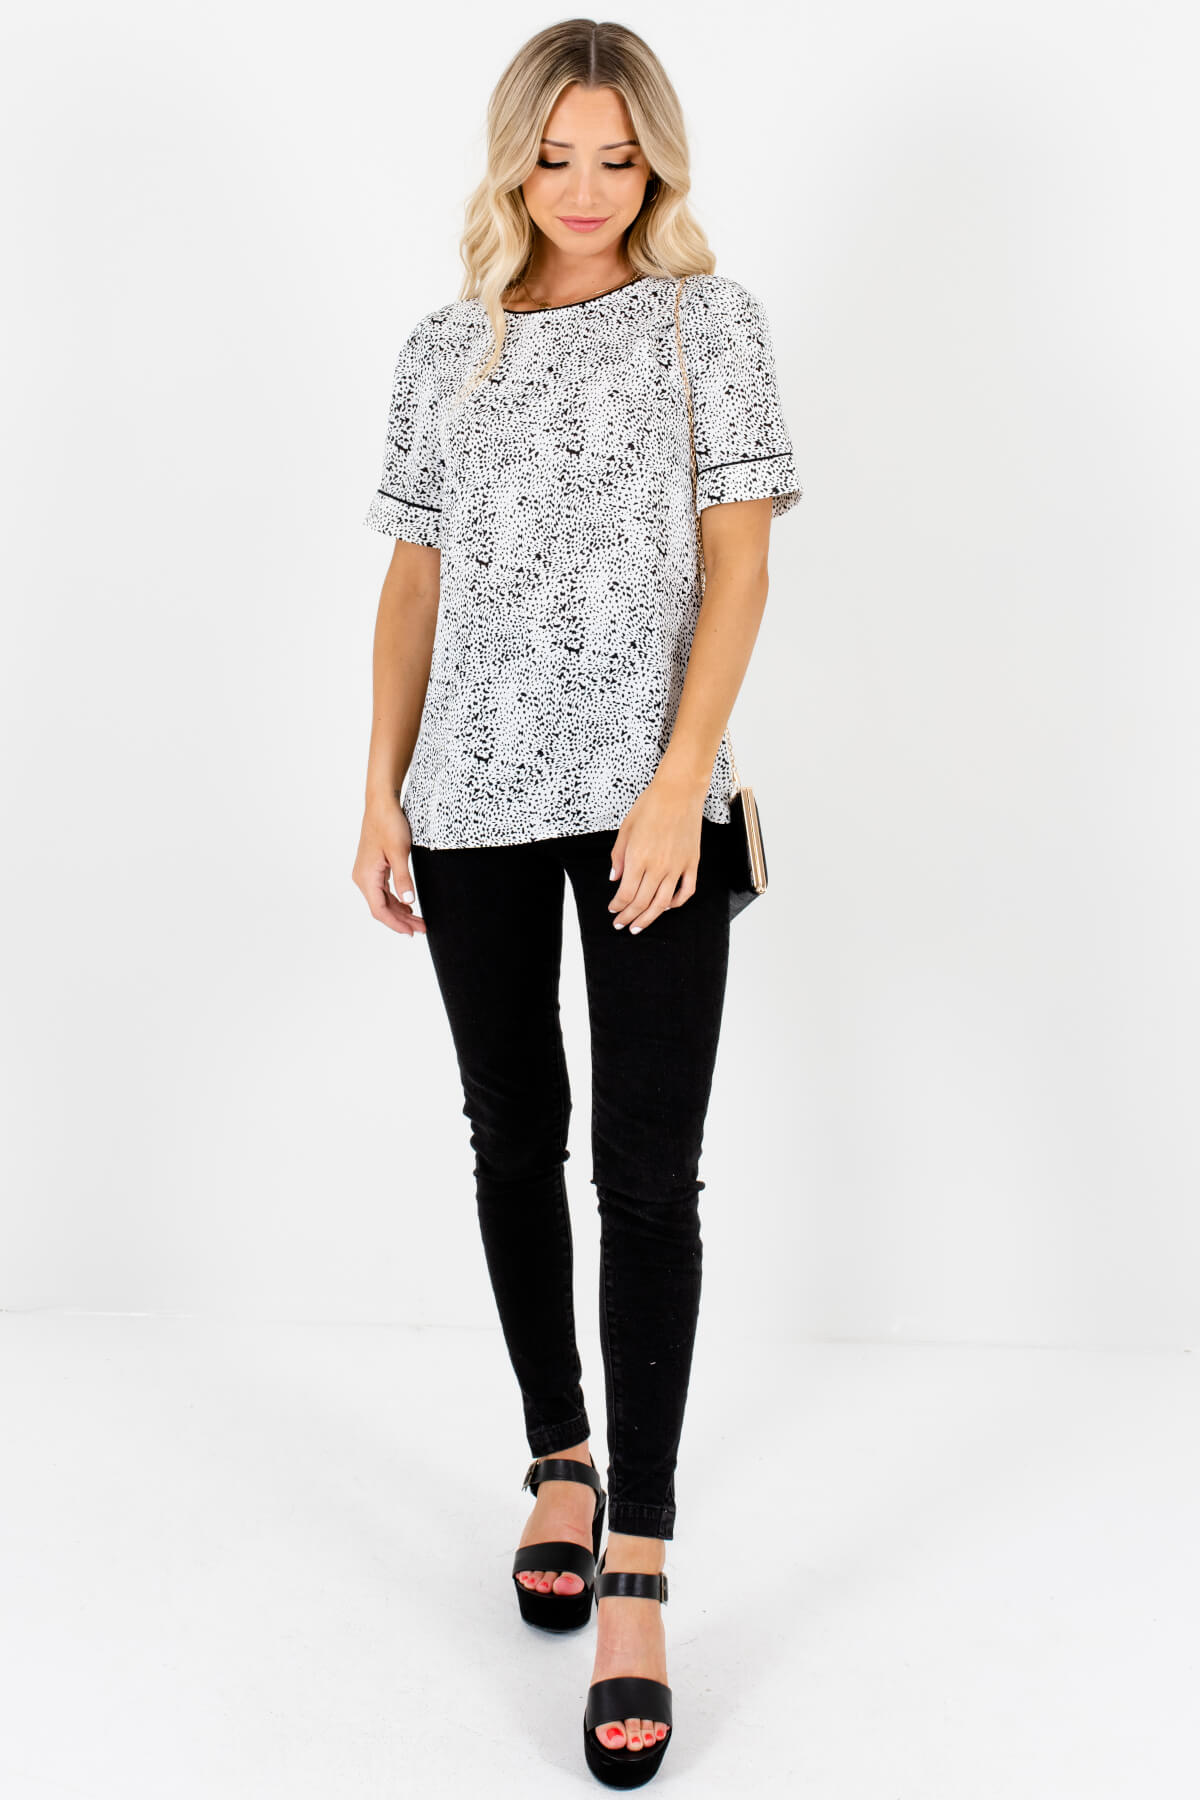 White Black Cheetah Print Tops Affordable Online Boutique